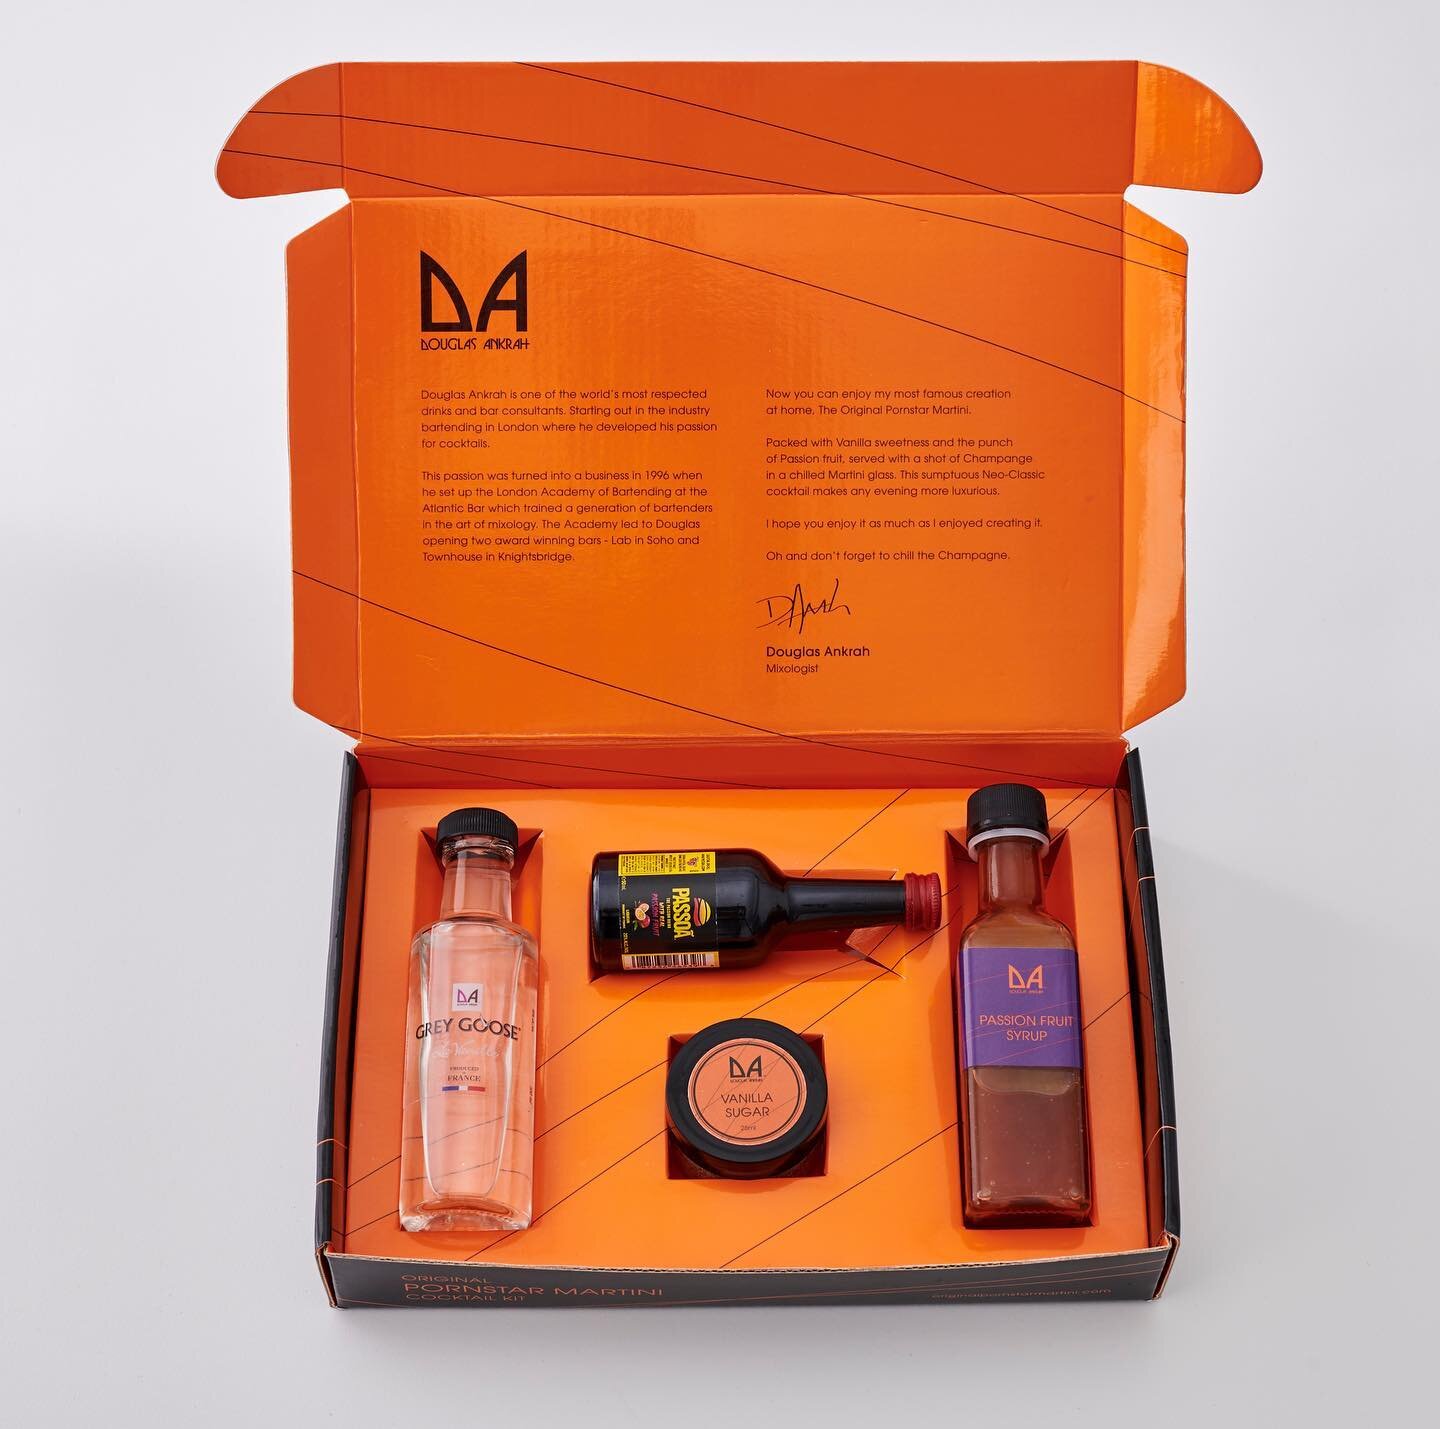 Excellent presentation, premium Spirits and Syrups in the Original Pornstar Martini Kit. Perfect gifting or for home cocktails. Buy now via our shop link.
.
.
#london #1cocktail 
#pornstarmartini
#cocktails #OPMK #cocktailsofinstagram #cocktailsathome #cocktailkit #pstar #bespokegifts
#stockingfillers
#cocktaillovers
#christmascocktails
#cocktailsathome
#corporategifting 
#valentinesday
#newyearseve